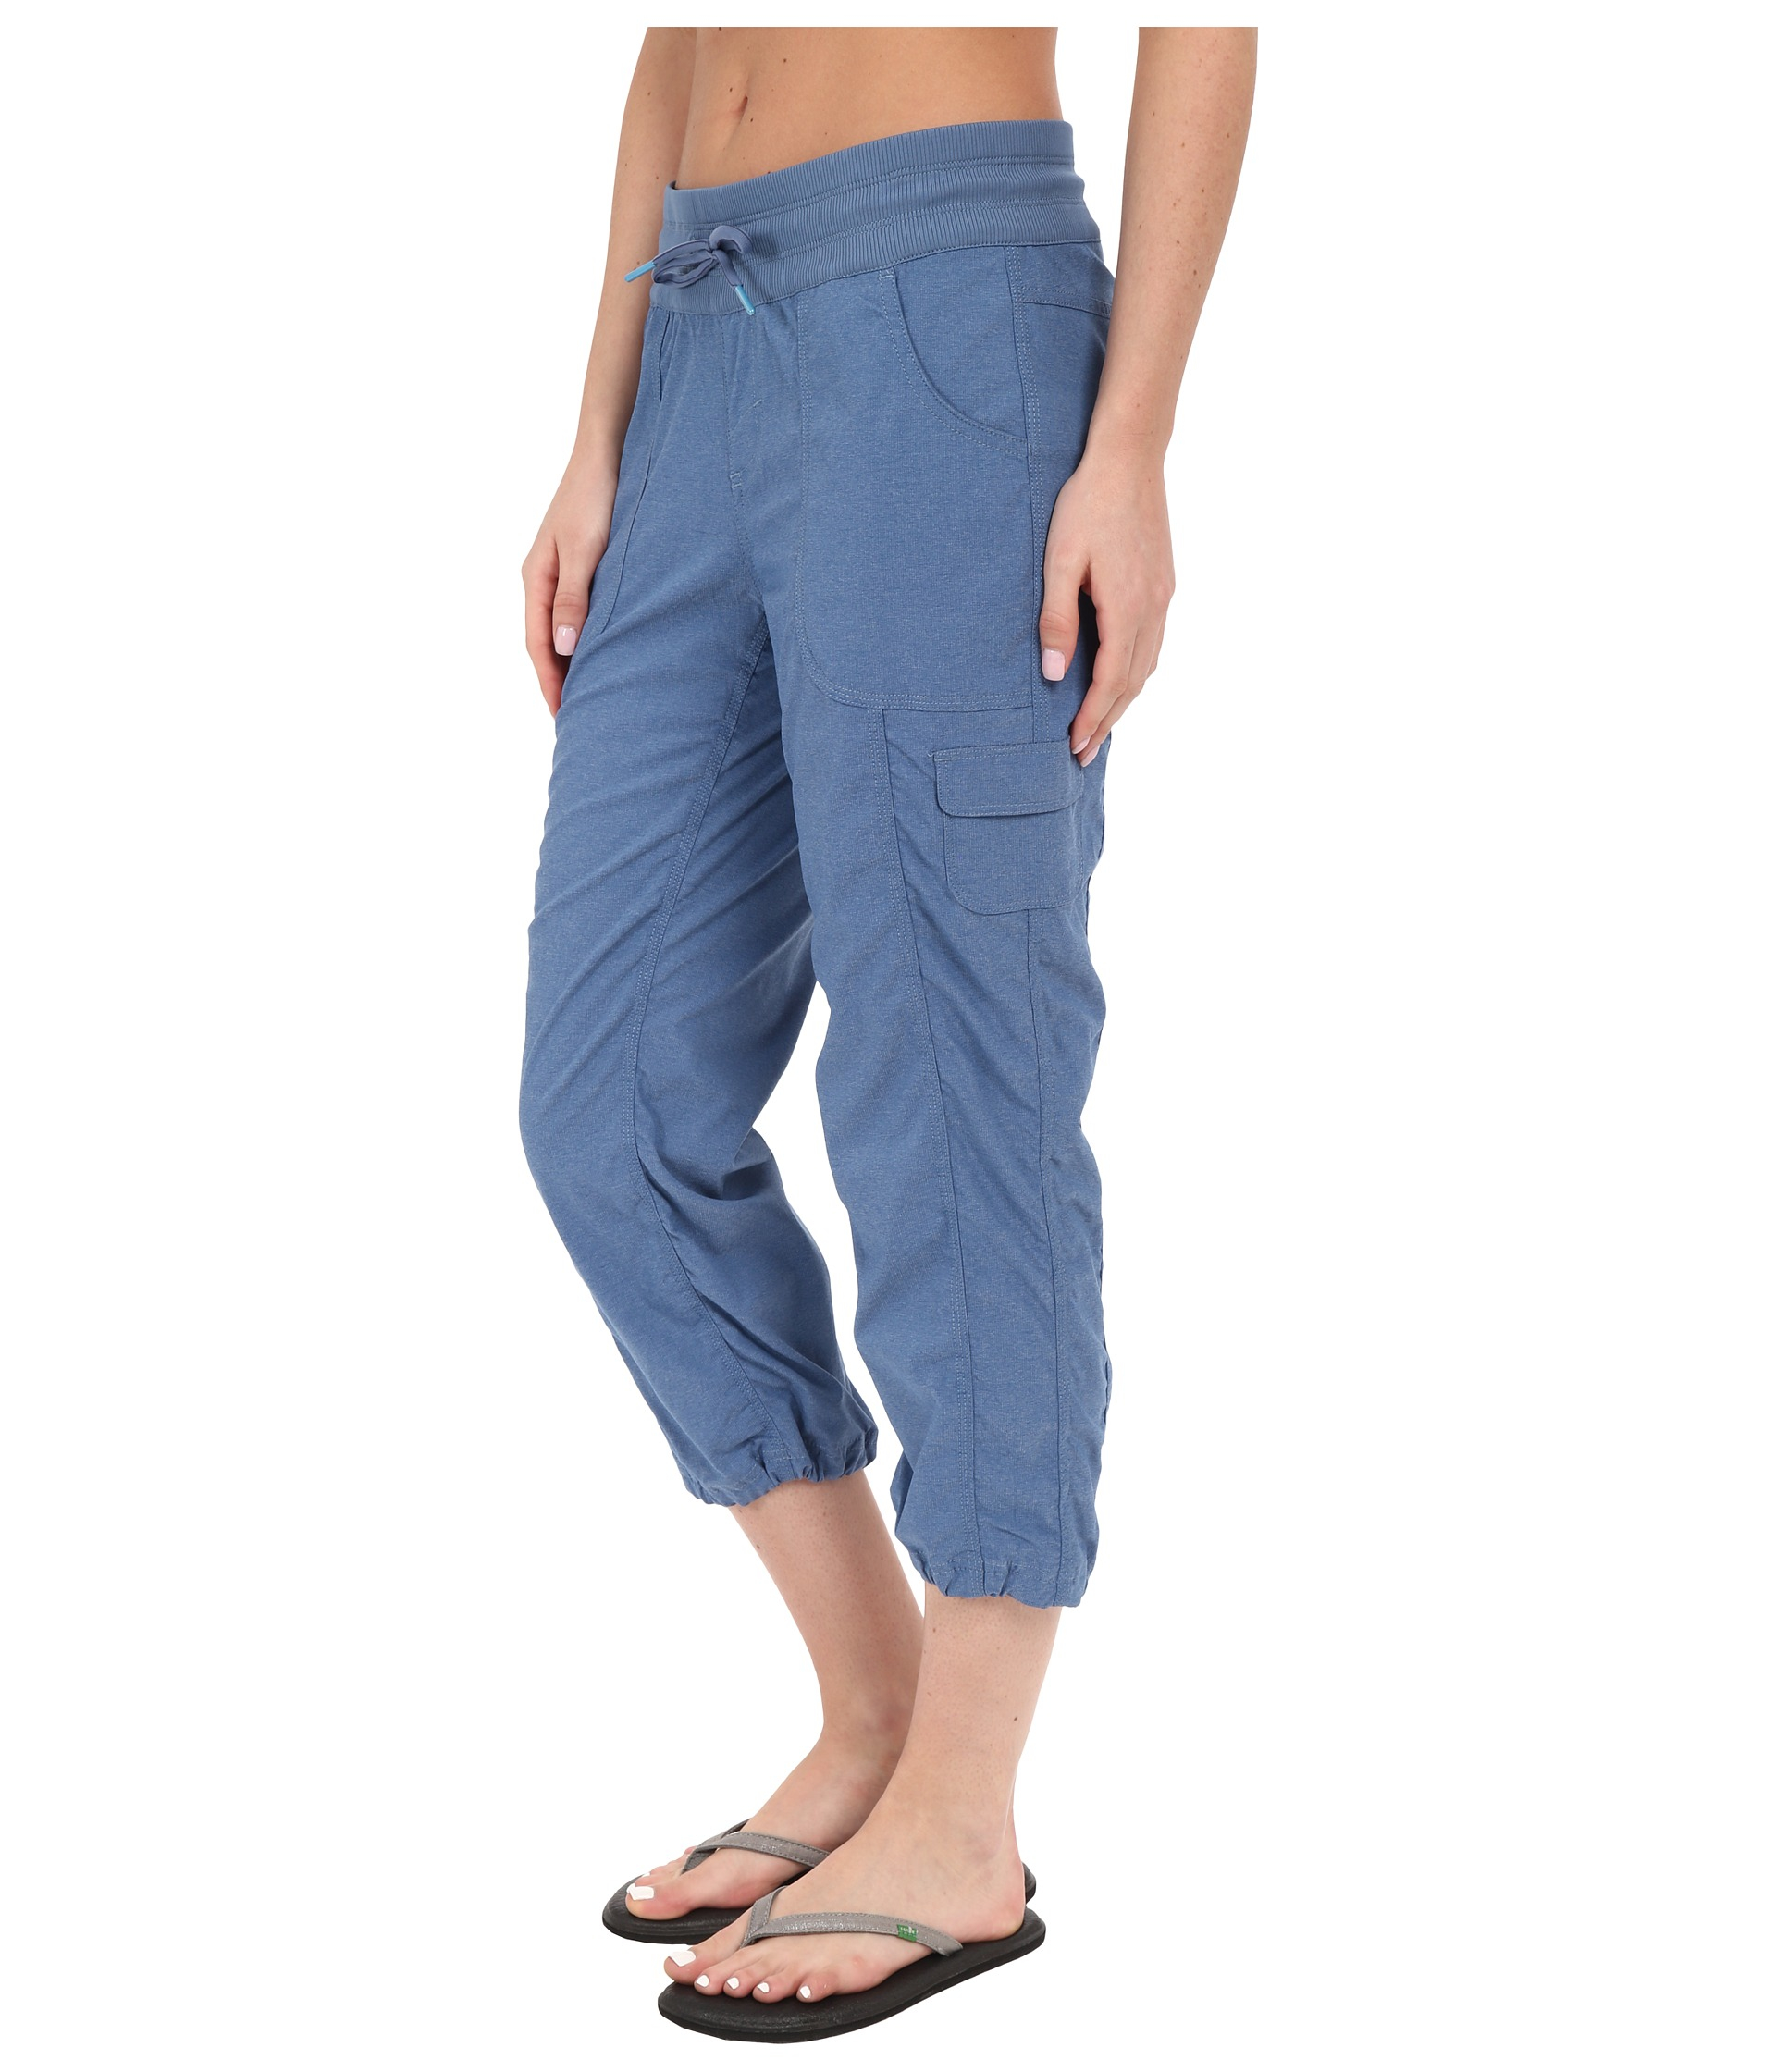 Lyst - The North Face Aphrodite Capris in Blue